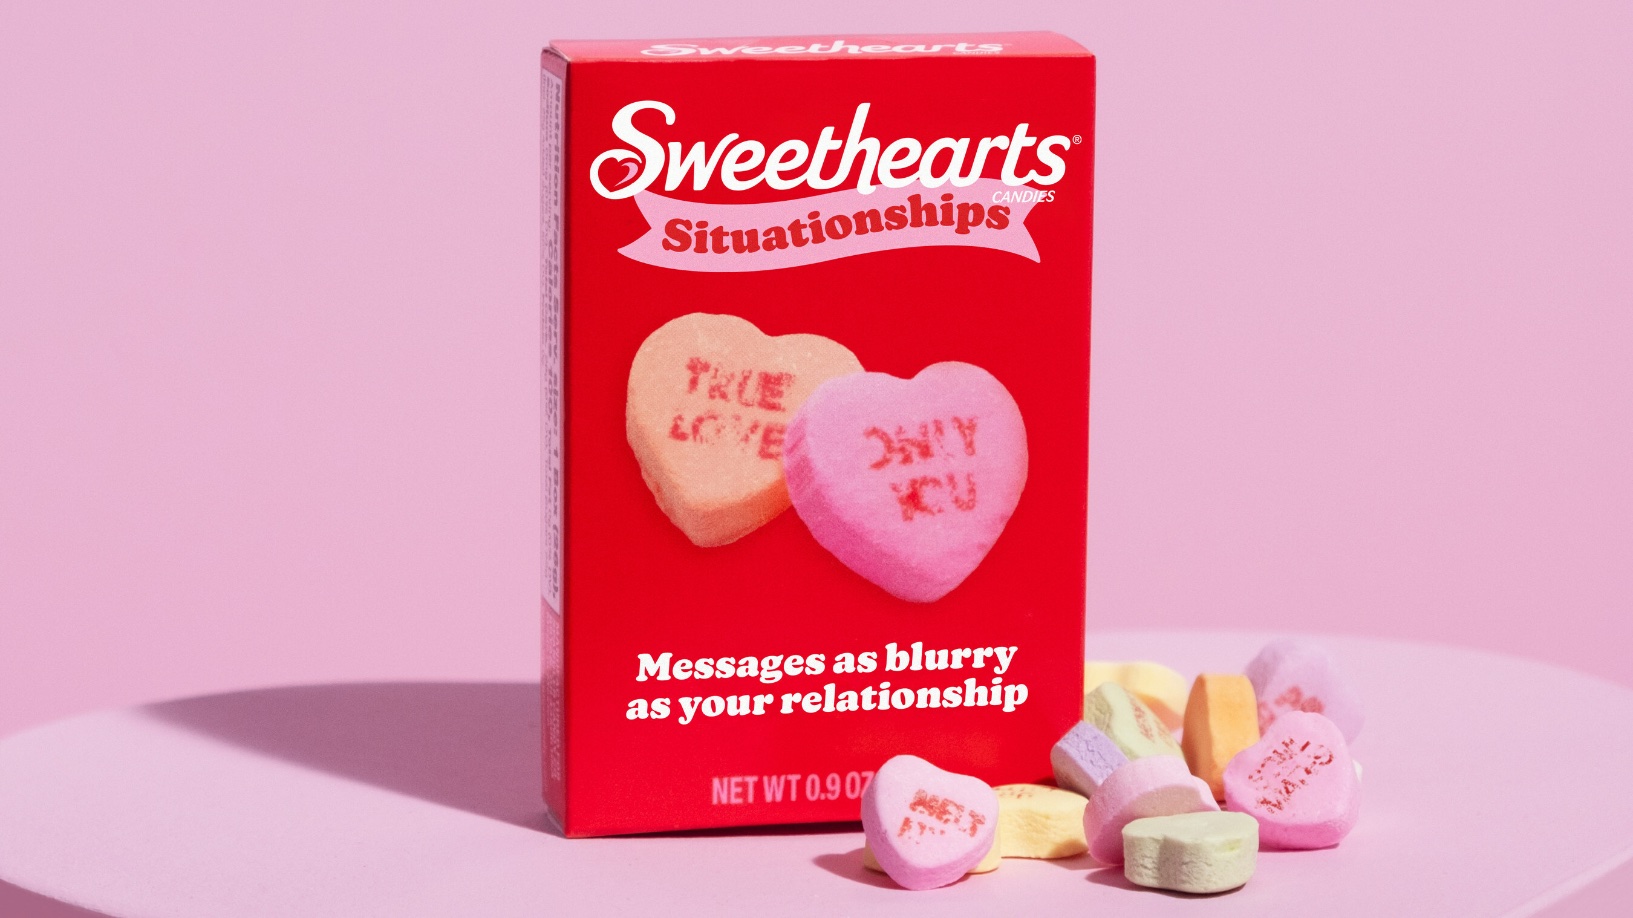 Embracing Modern Dating Trends with Sweet, Muddled Messages From Sweethearts